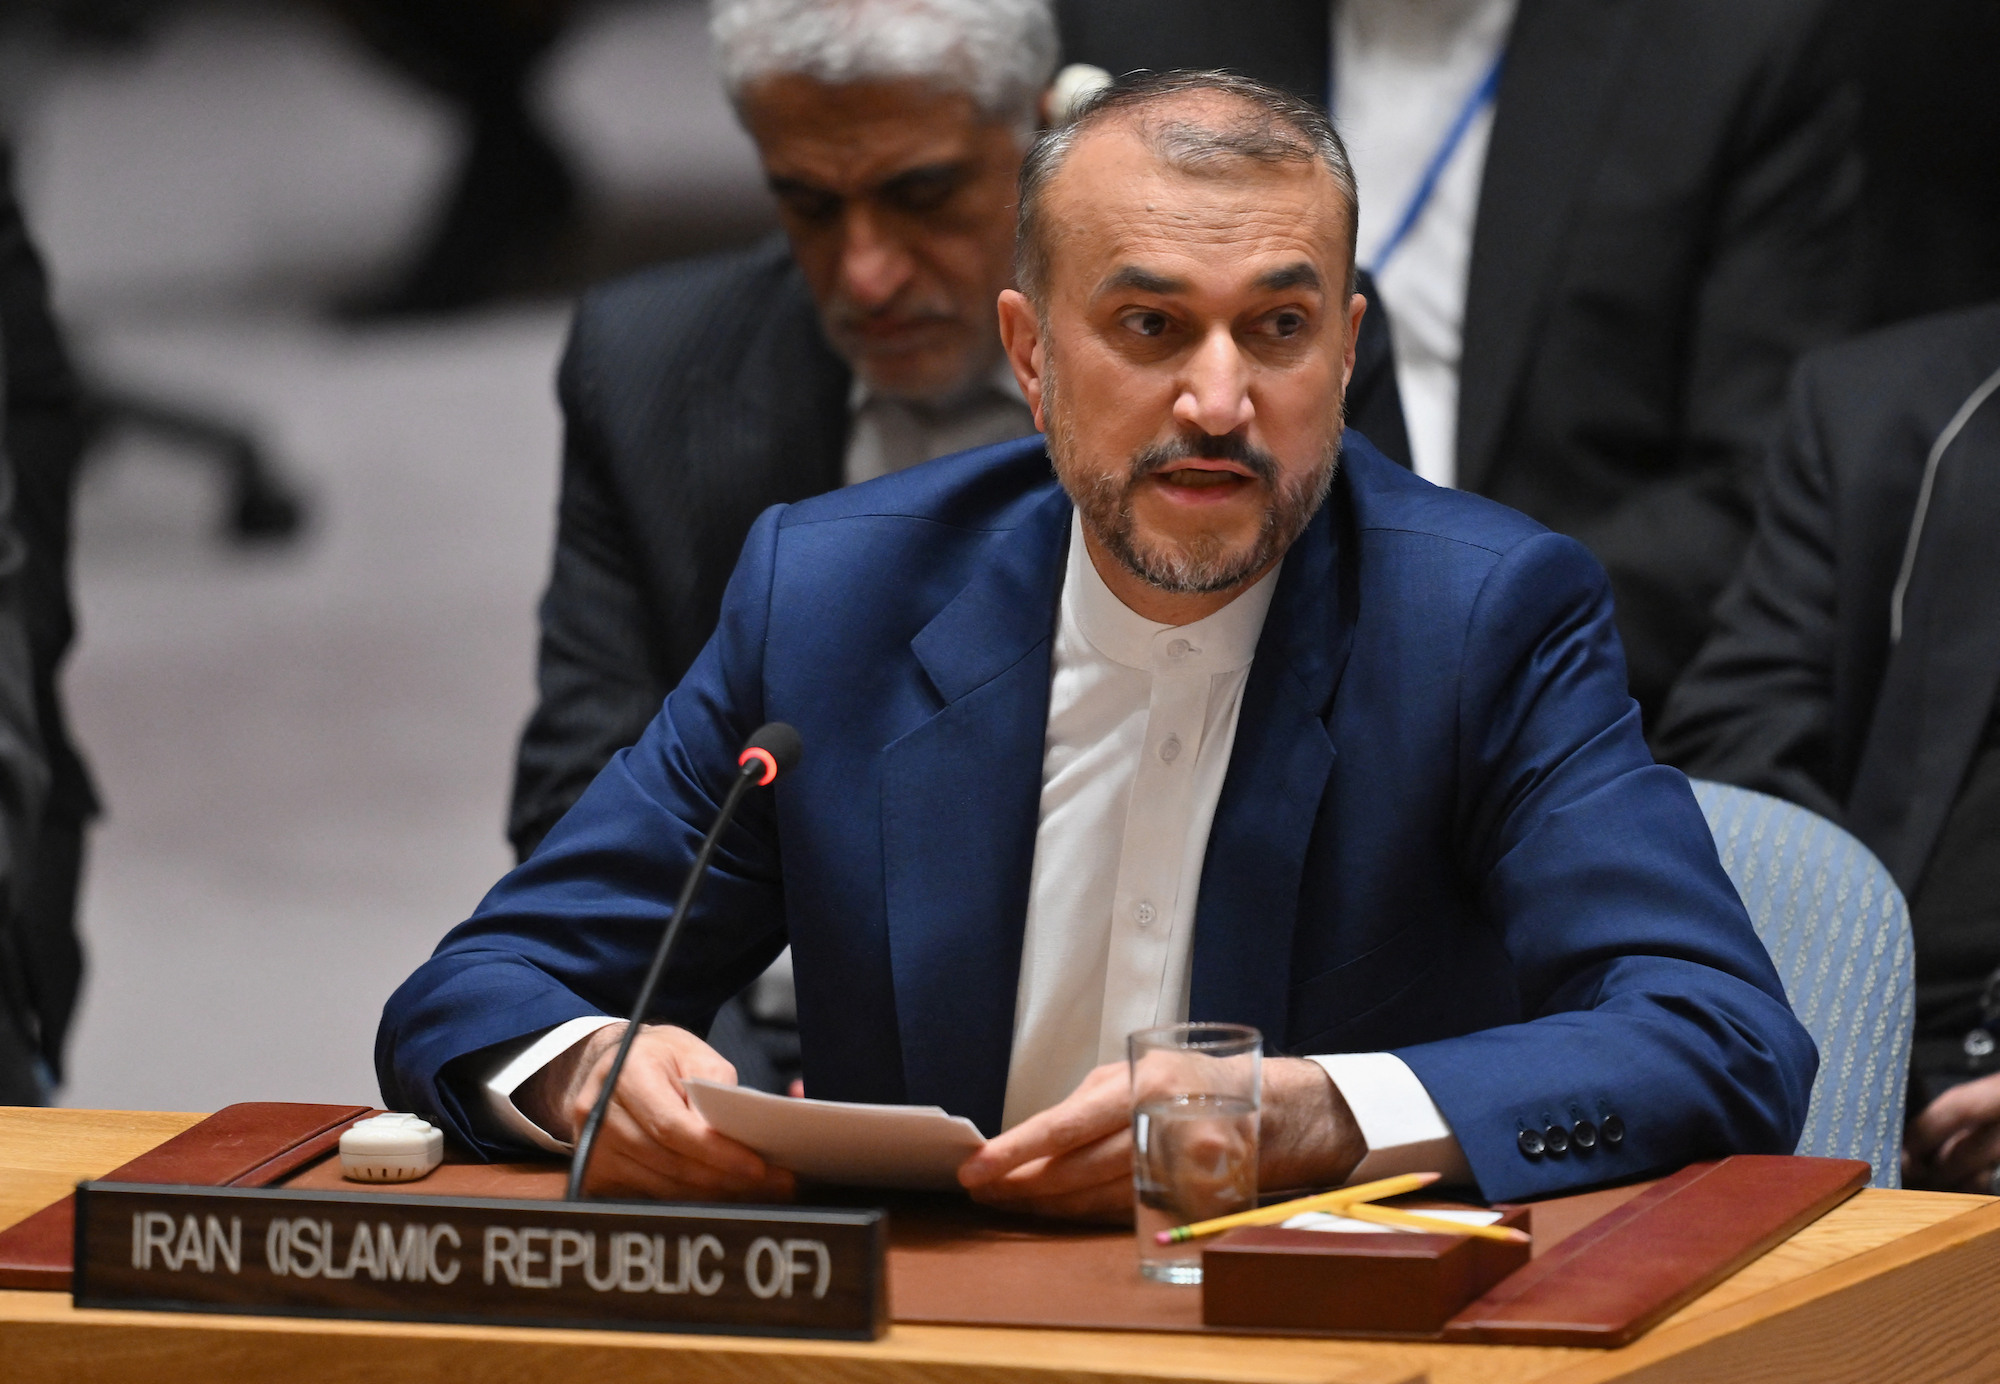 Iran's Foreign Minister Hossein Amir-Abdollahian speaks during a UN Security Council meeting in New York City on Thursday.